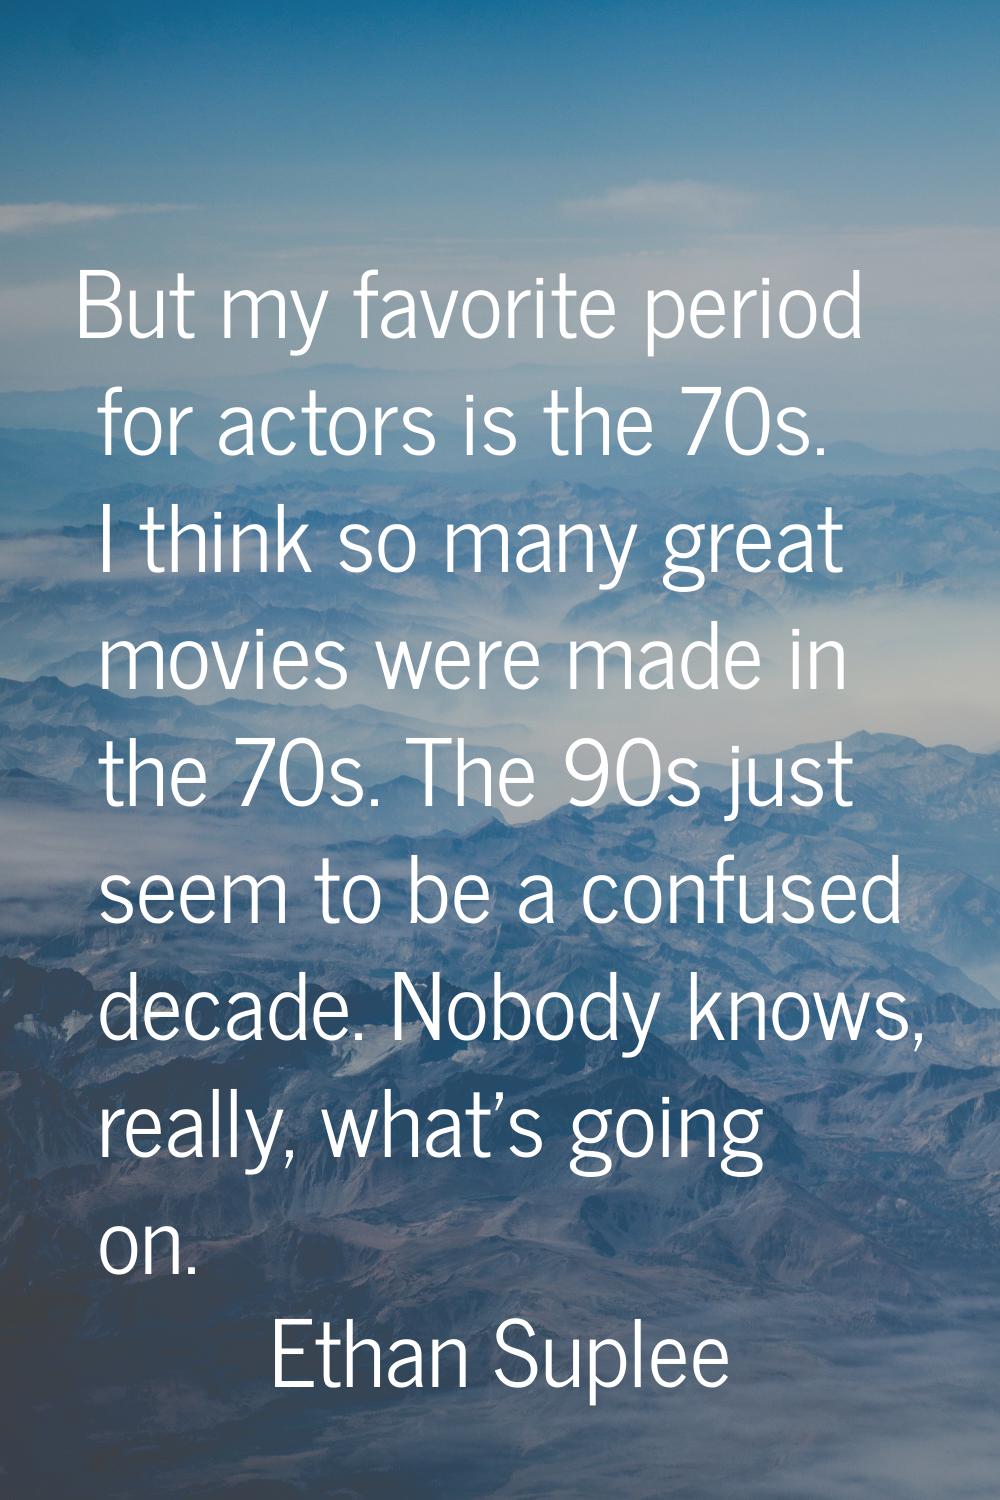 But my favorite period for actors is the 70s. I think so many great movies were made in the 70s. Th